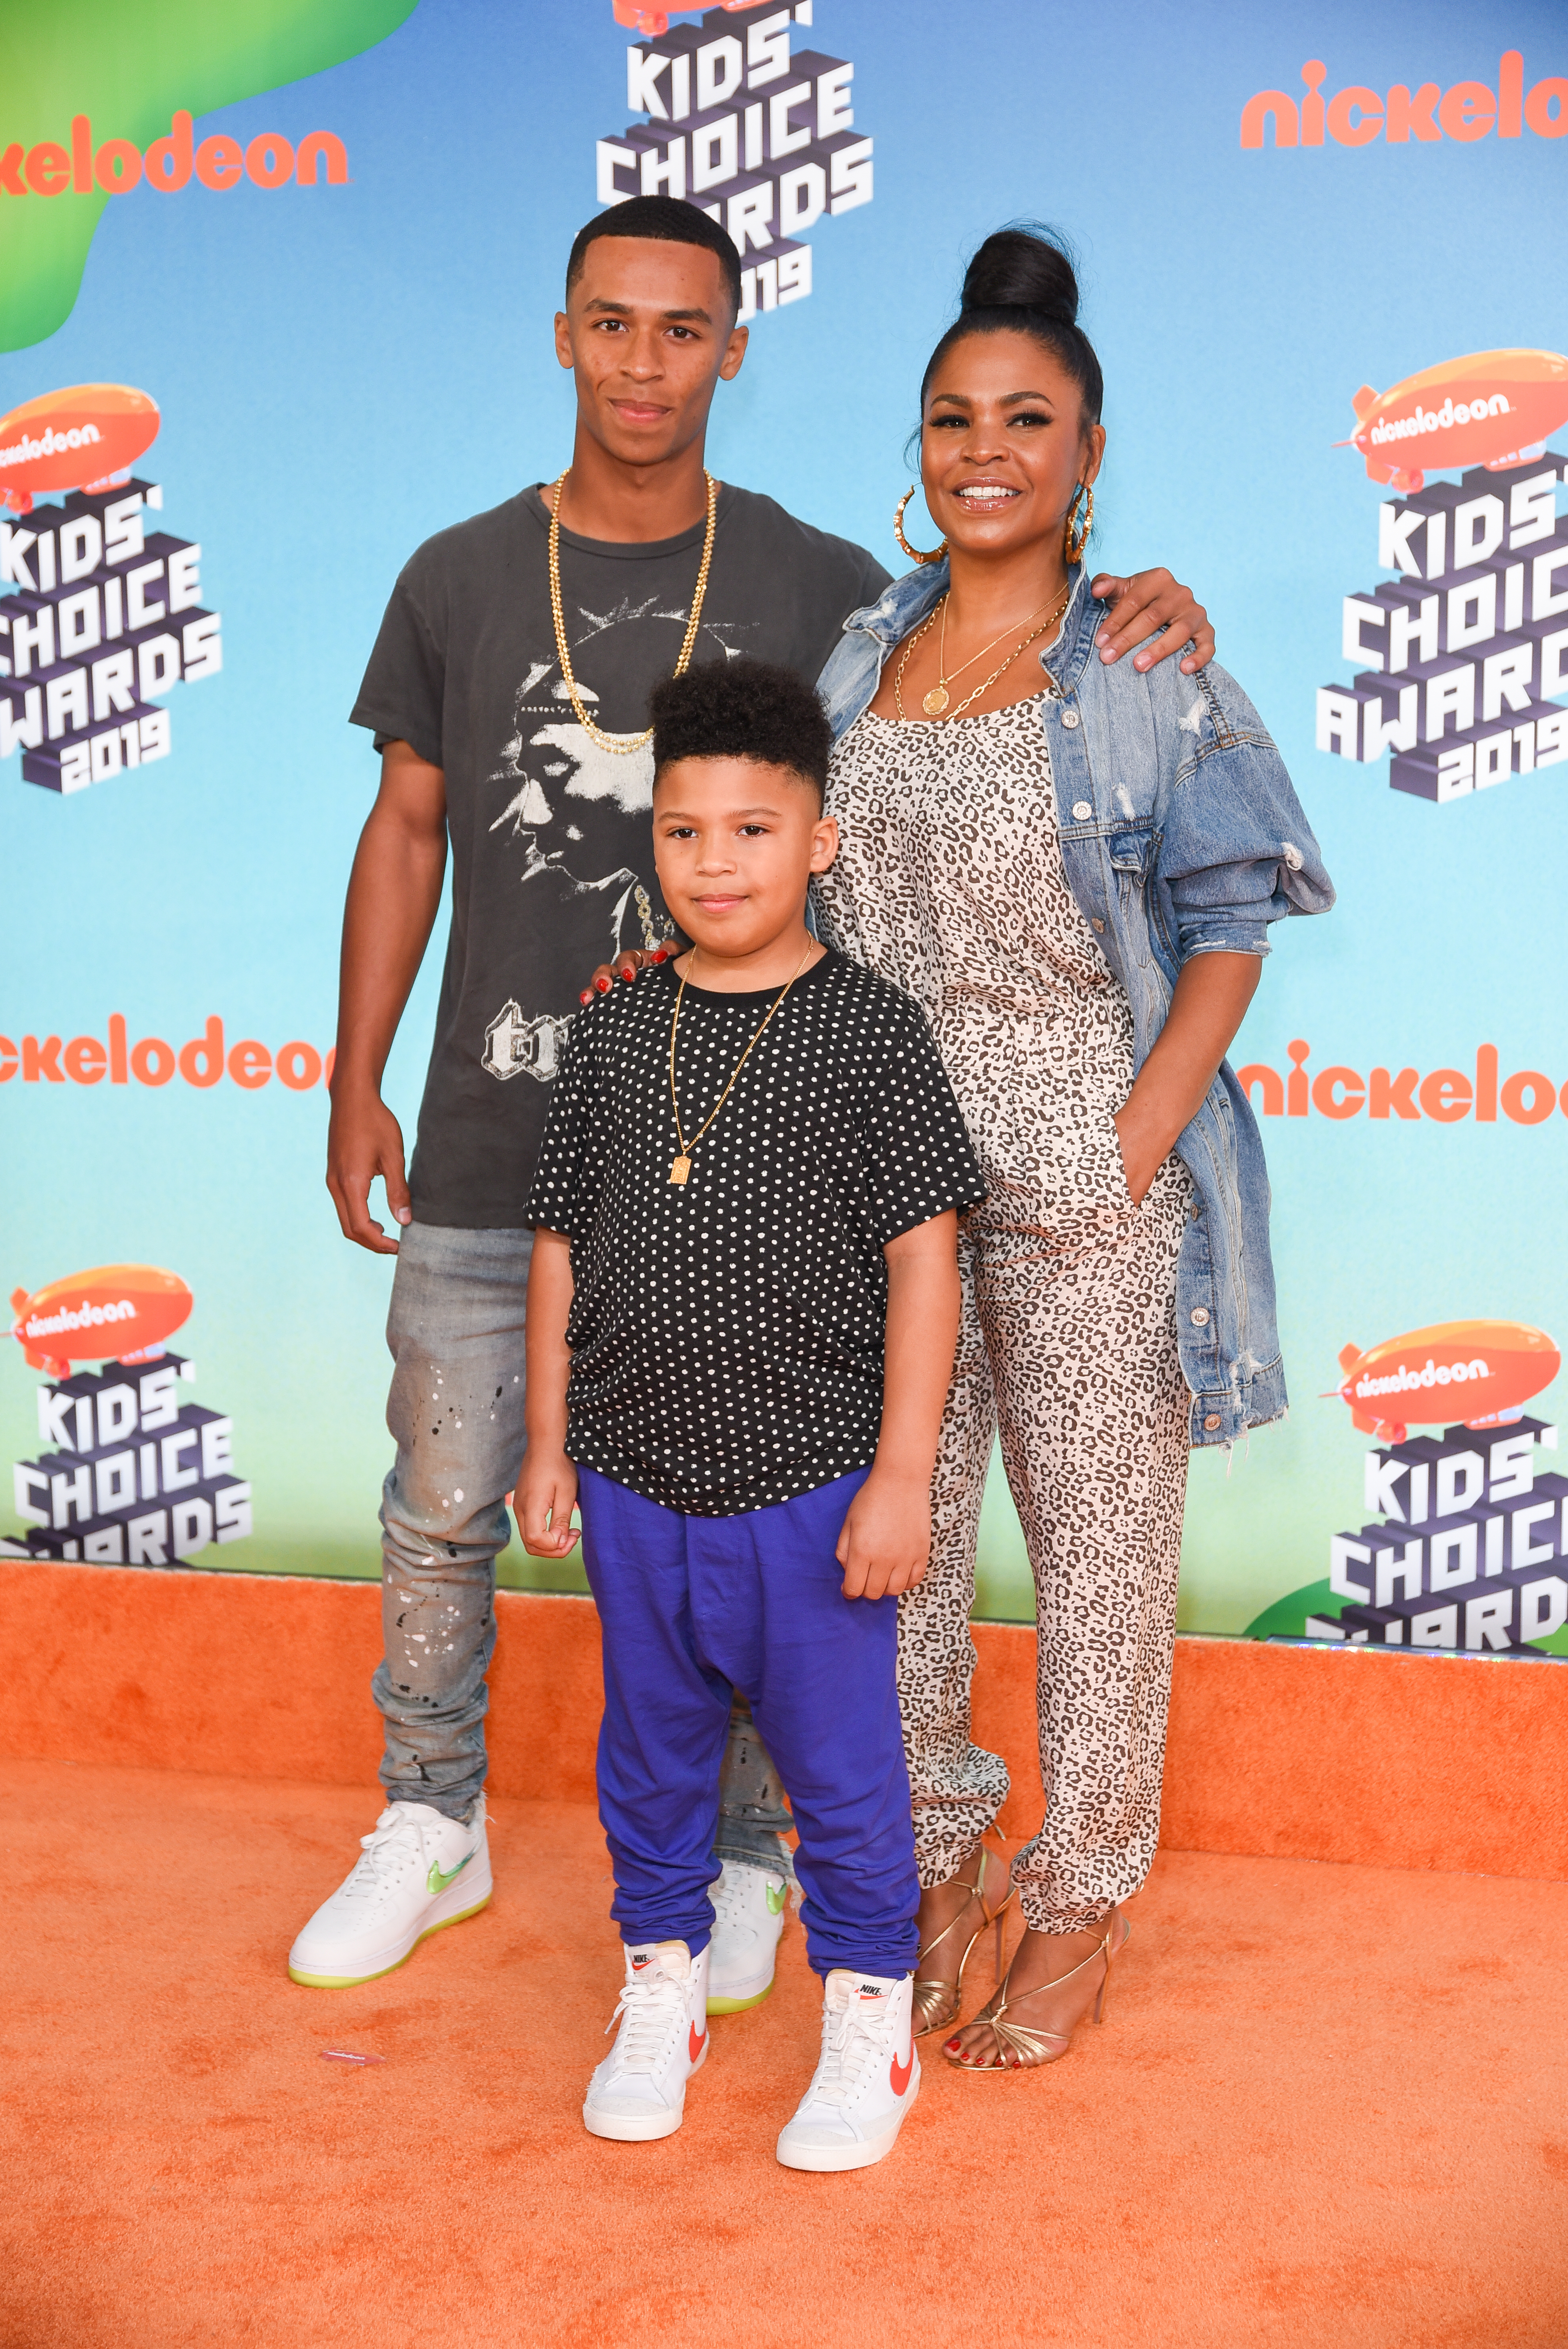 Kez Sunday Udoka, Nia Long and Massai Zhivago Dorsey II at Nickelodeon's 2019 Kids' Choice Awards at Galen Center on March 23, 2019 in Los Angeles, California. | Source: Getty Images